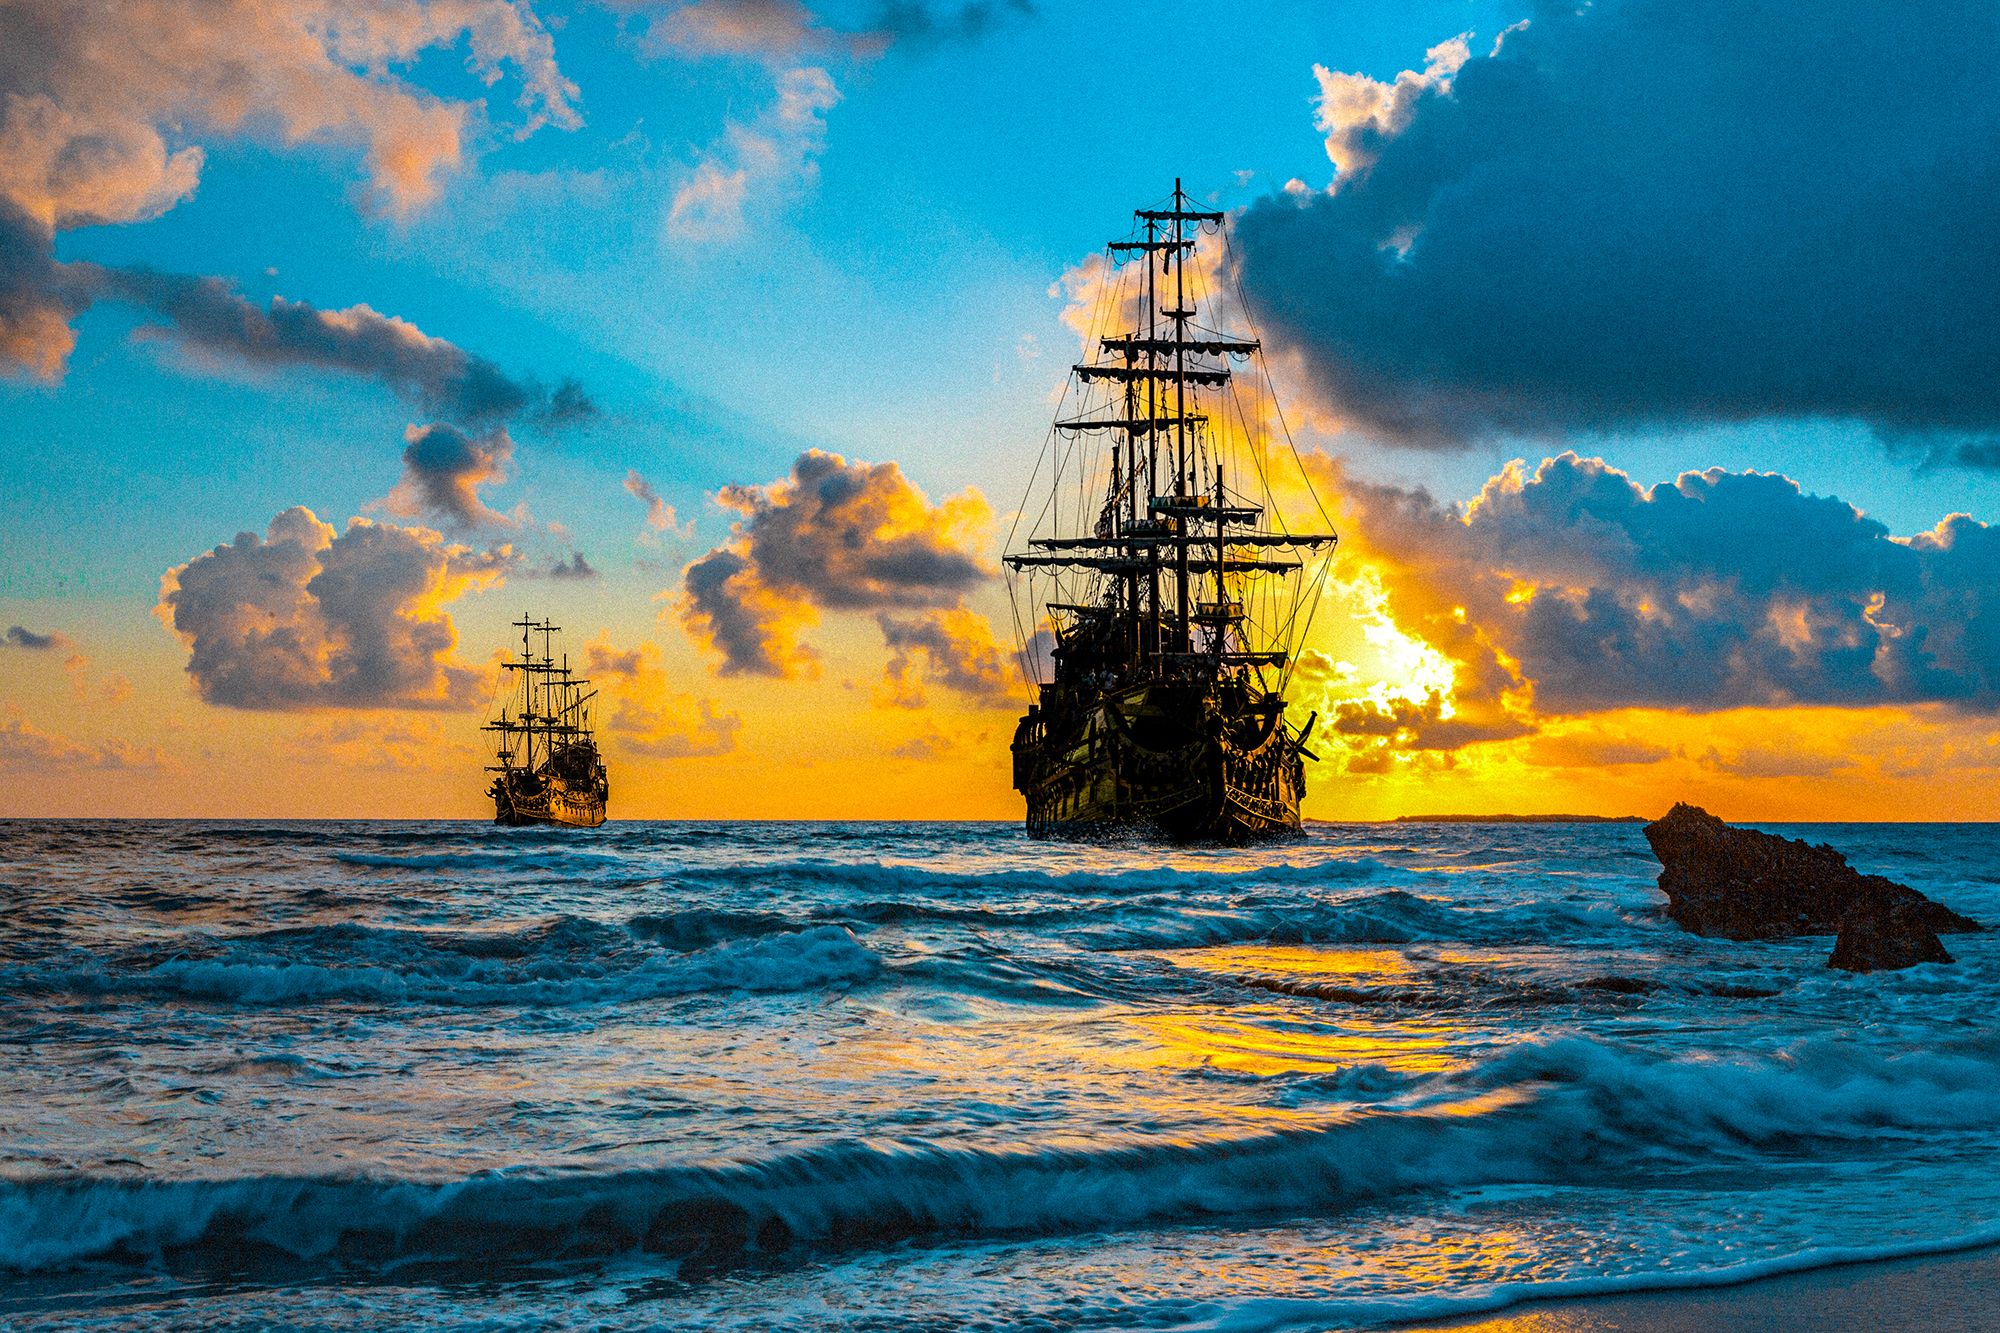 The Real-Life Pirates of the Caribbean